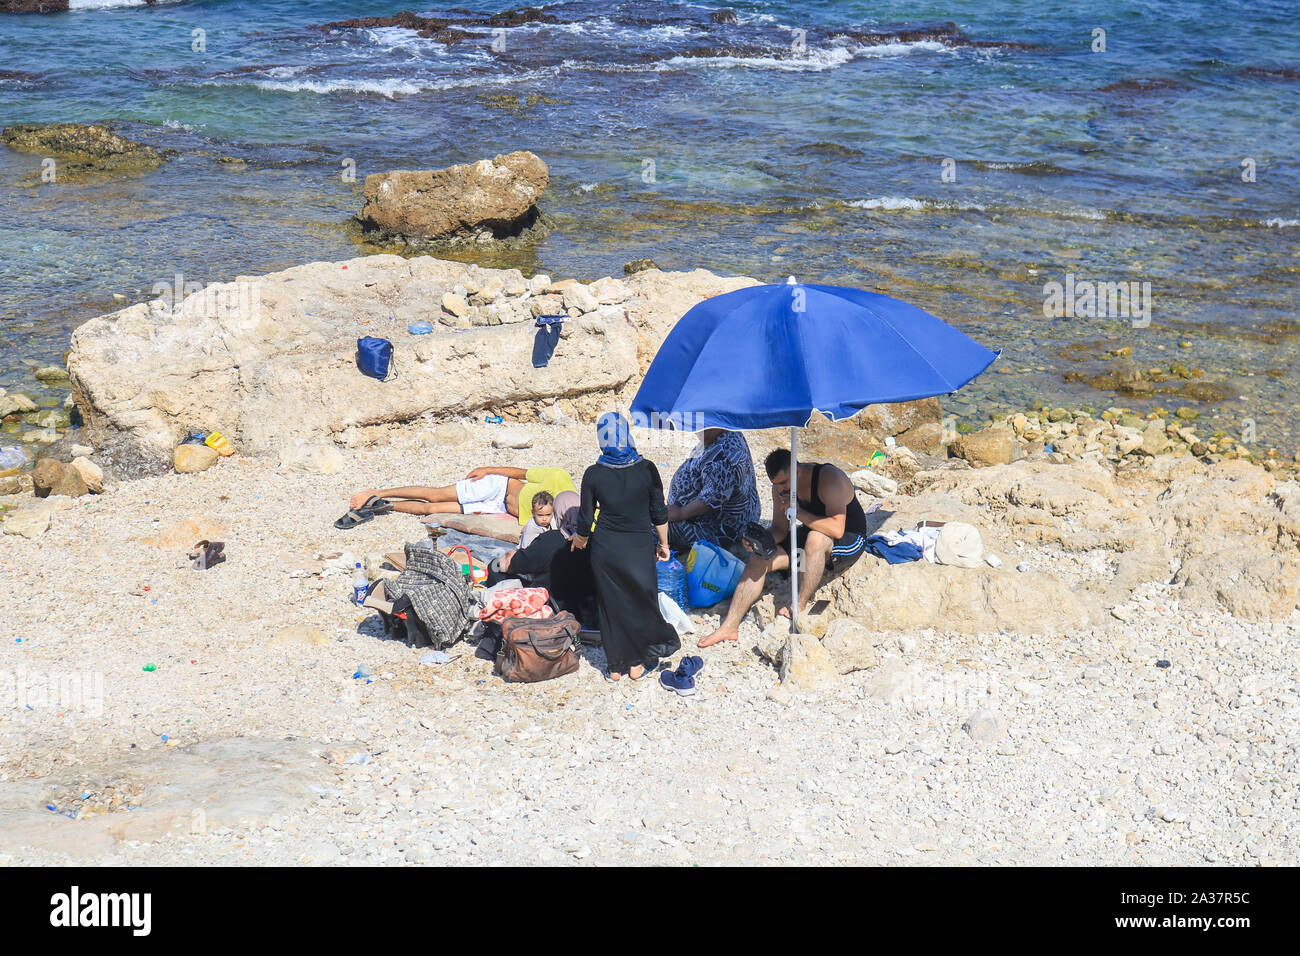 October 6, 2019, Beirut, Lebanon: A family shelters at the seafront during the hot and humid day in Beirut. (Credit Image: © Amer Ghazzal/SOPA Images via ZUMA Wire) Stock Photo